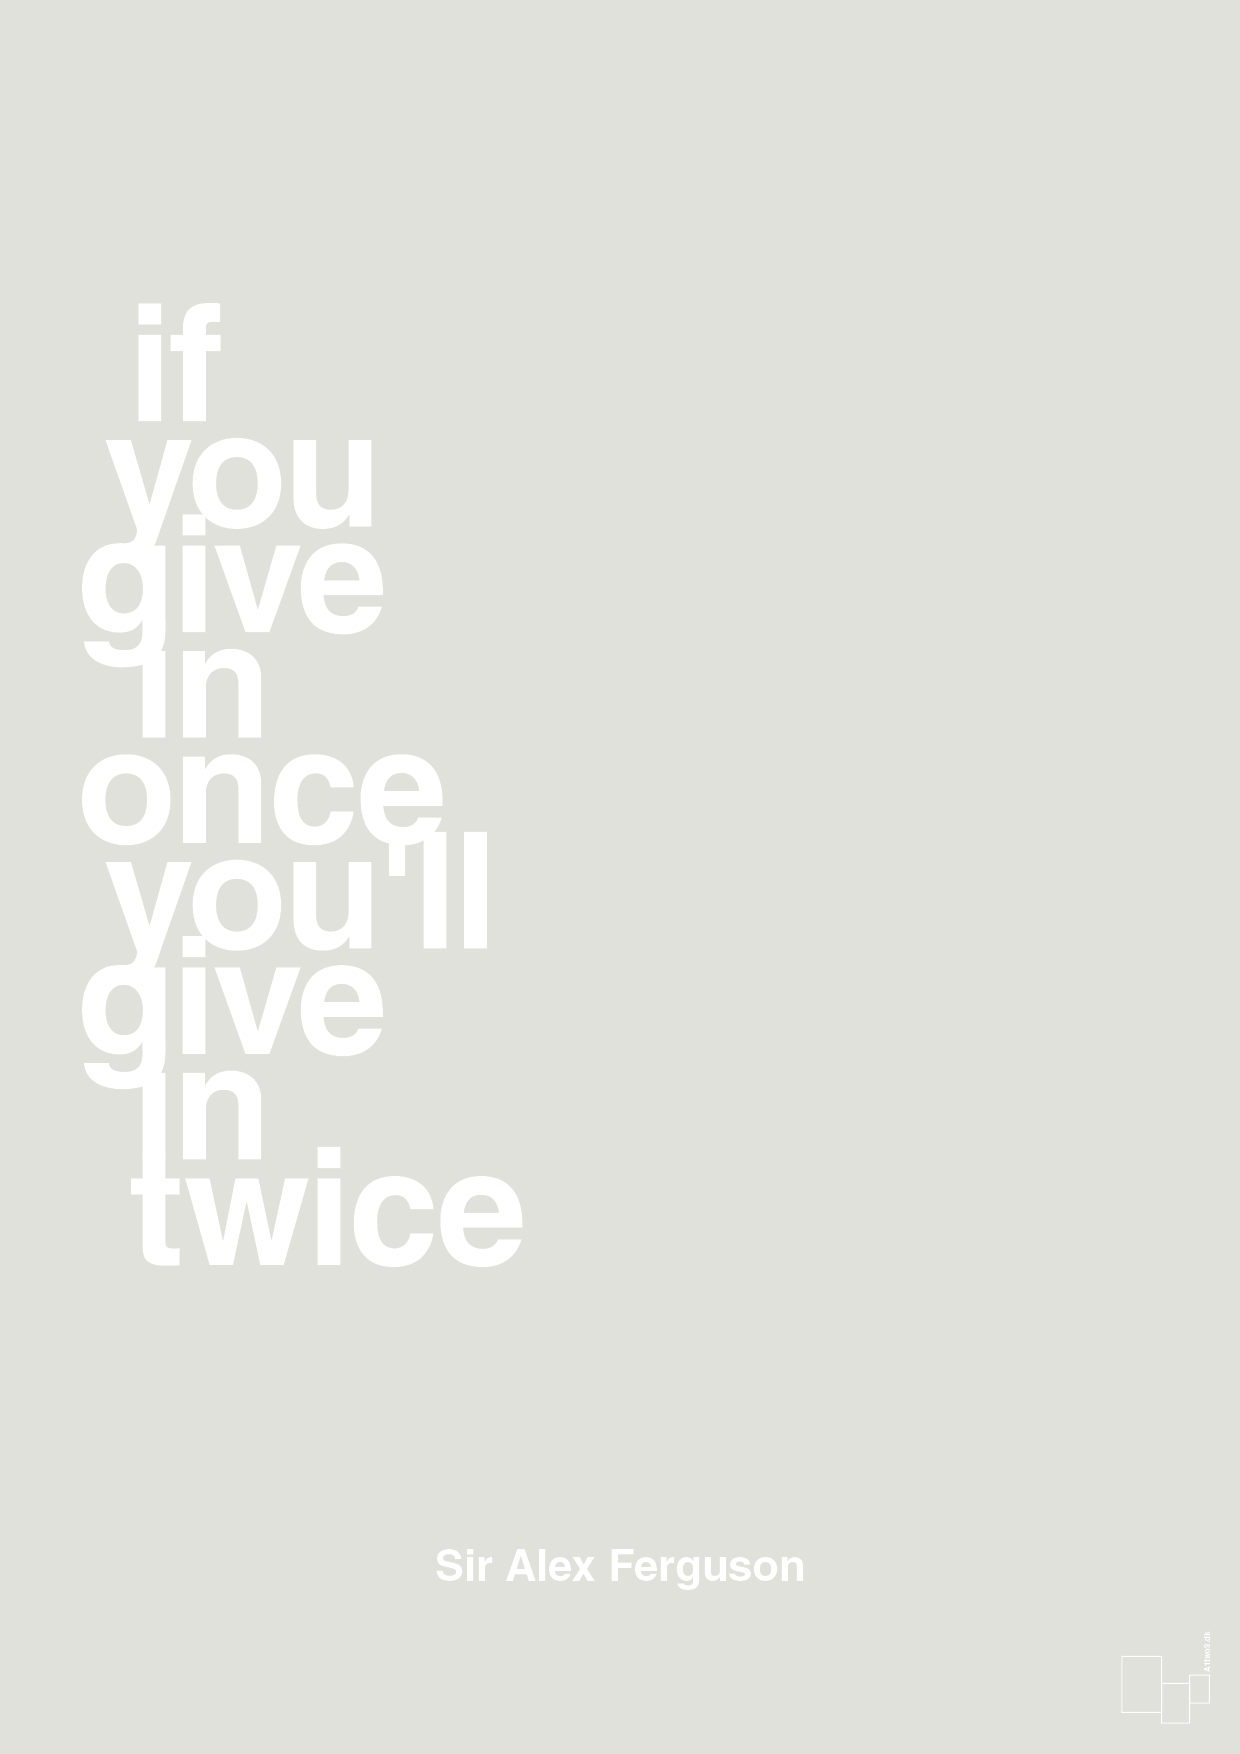 if you give in once you'll give in twice - Plakat med Citater i Painters White